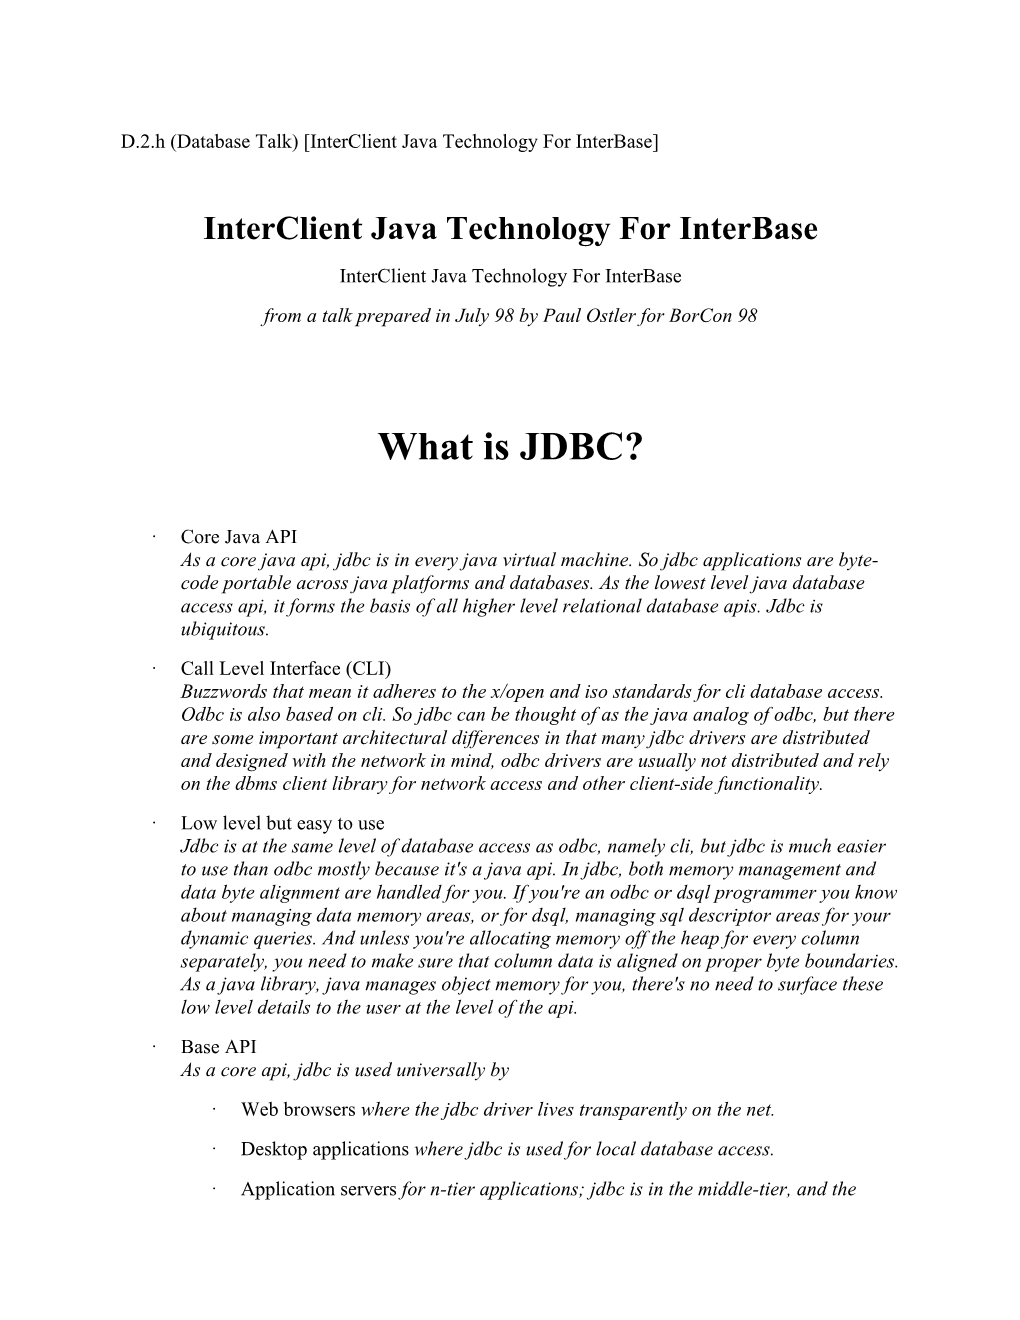 What Is JDBC?